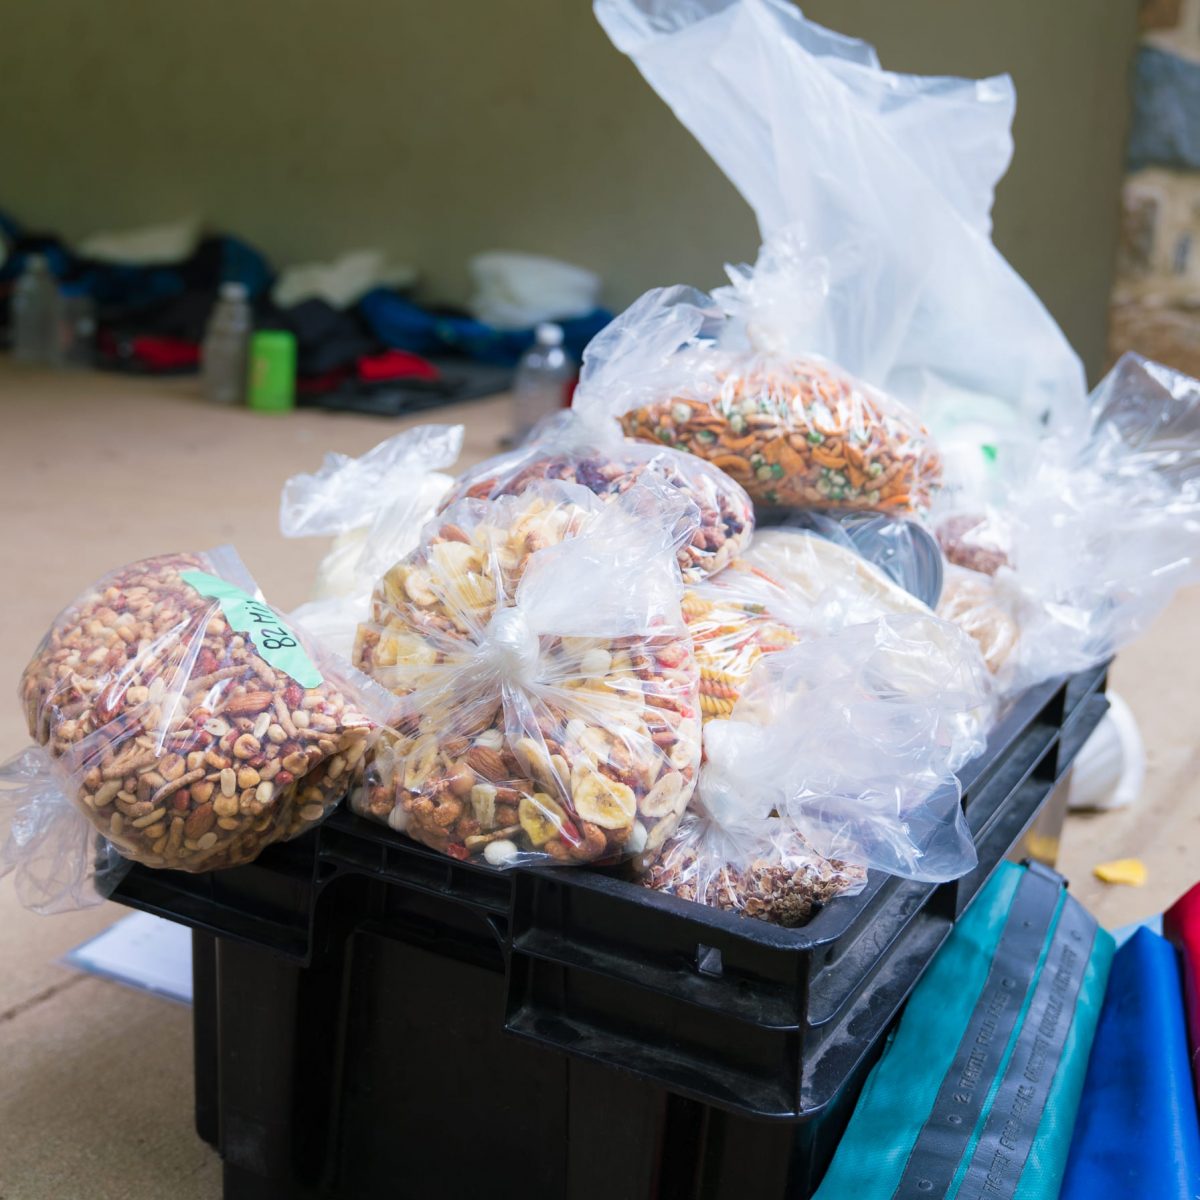 Food and supplies from one of the expedition programs.